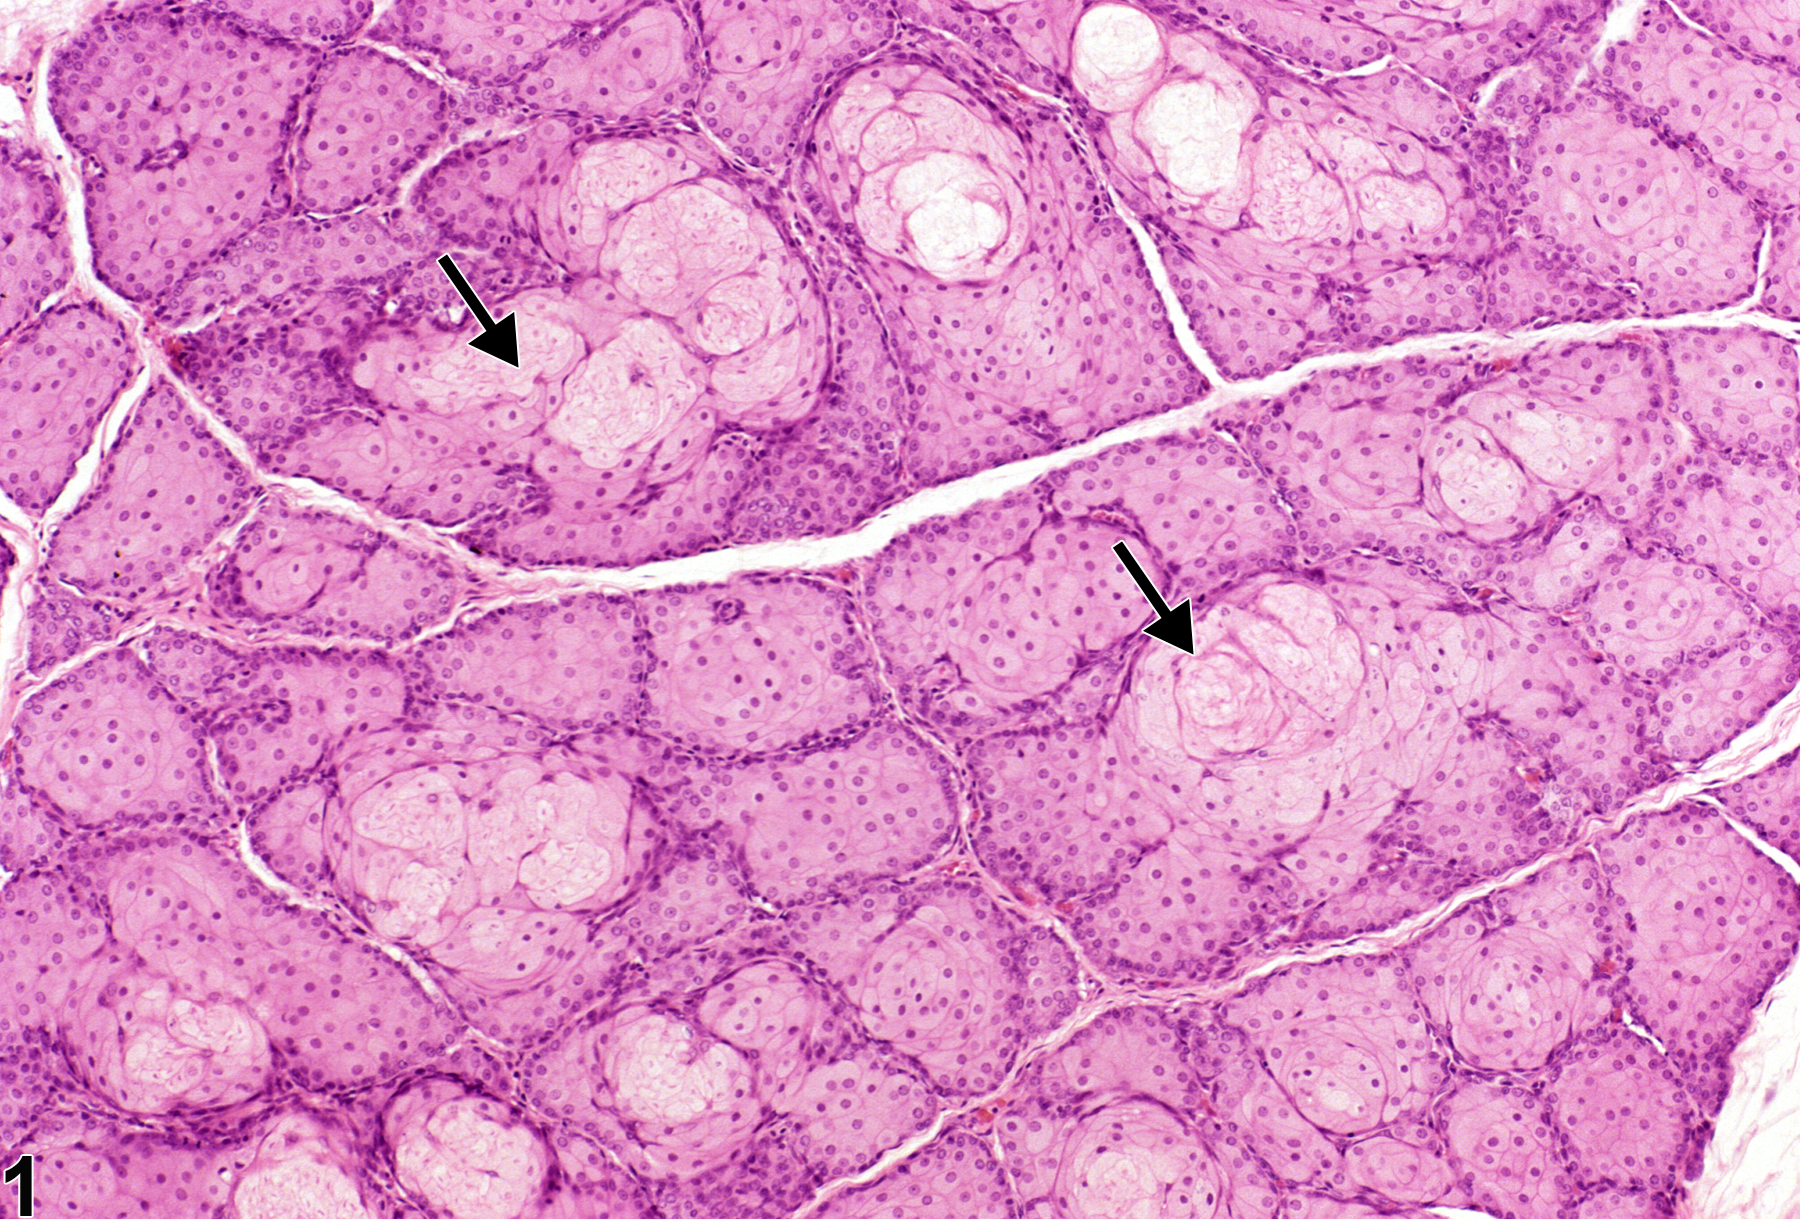 Image of hypertrophy in the Zymbal's gland from a male F344/N rat in a chronic study